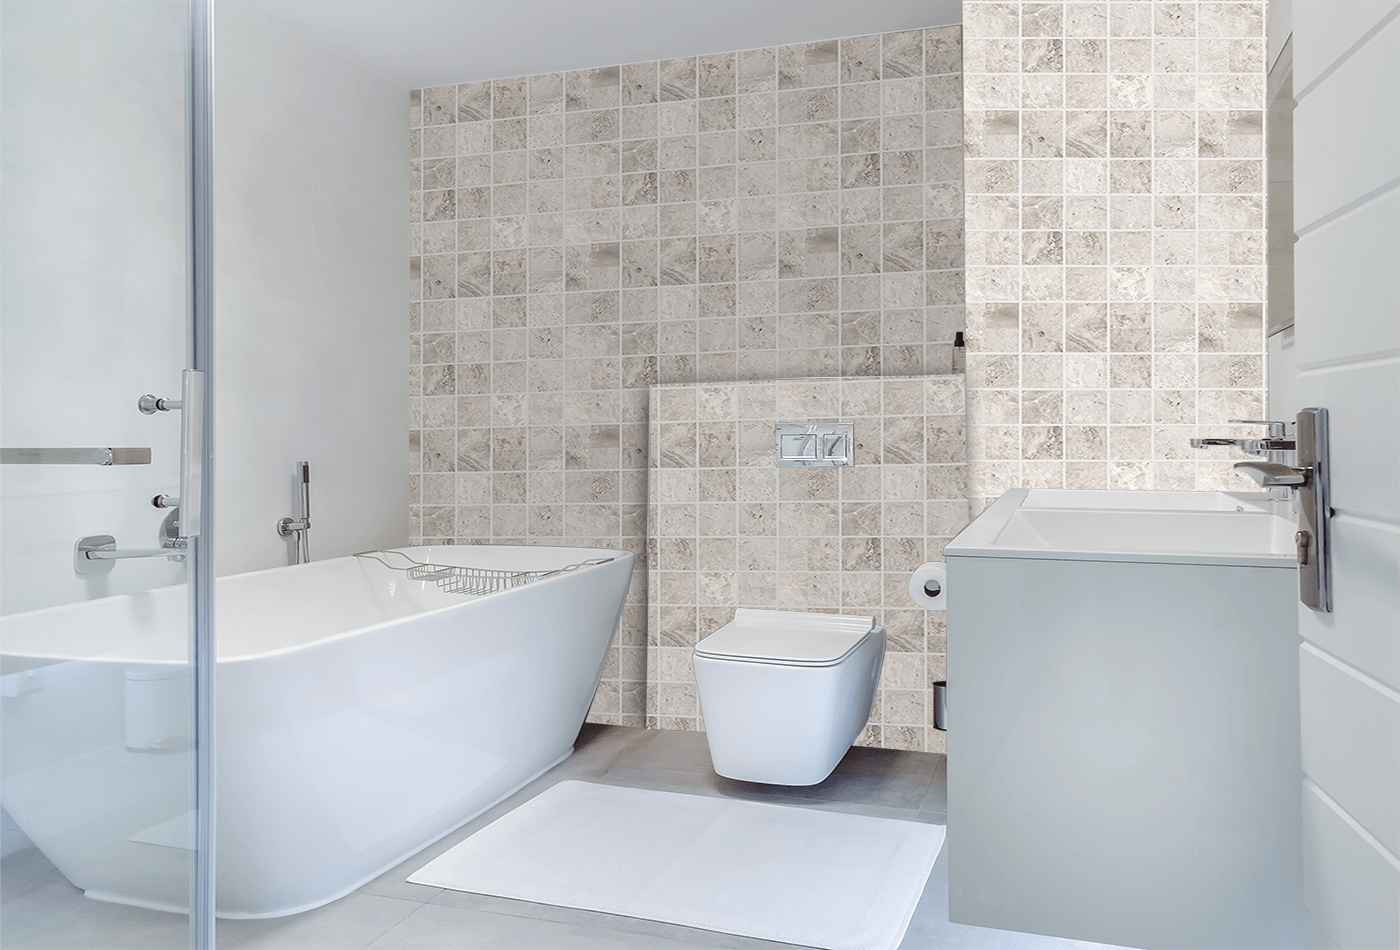 How to Use Mosaic Tiles in Your Bathroom